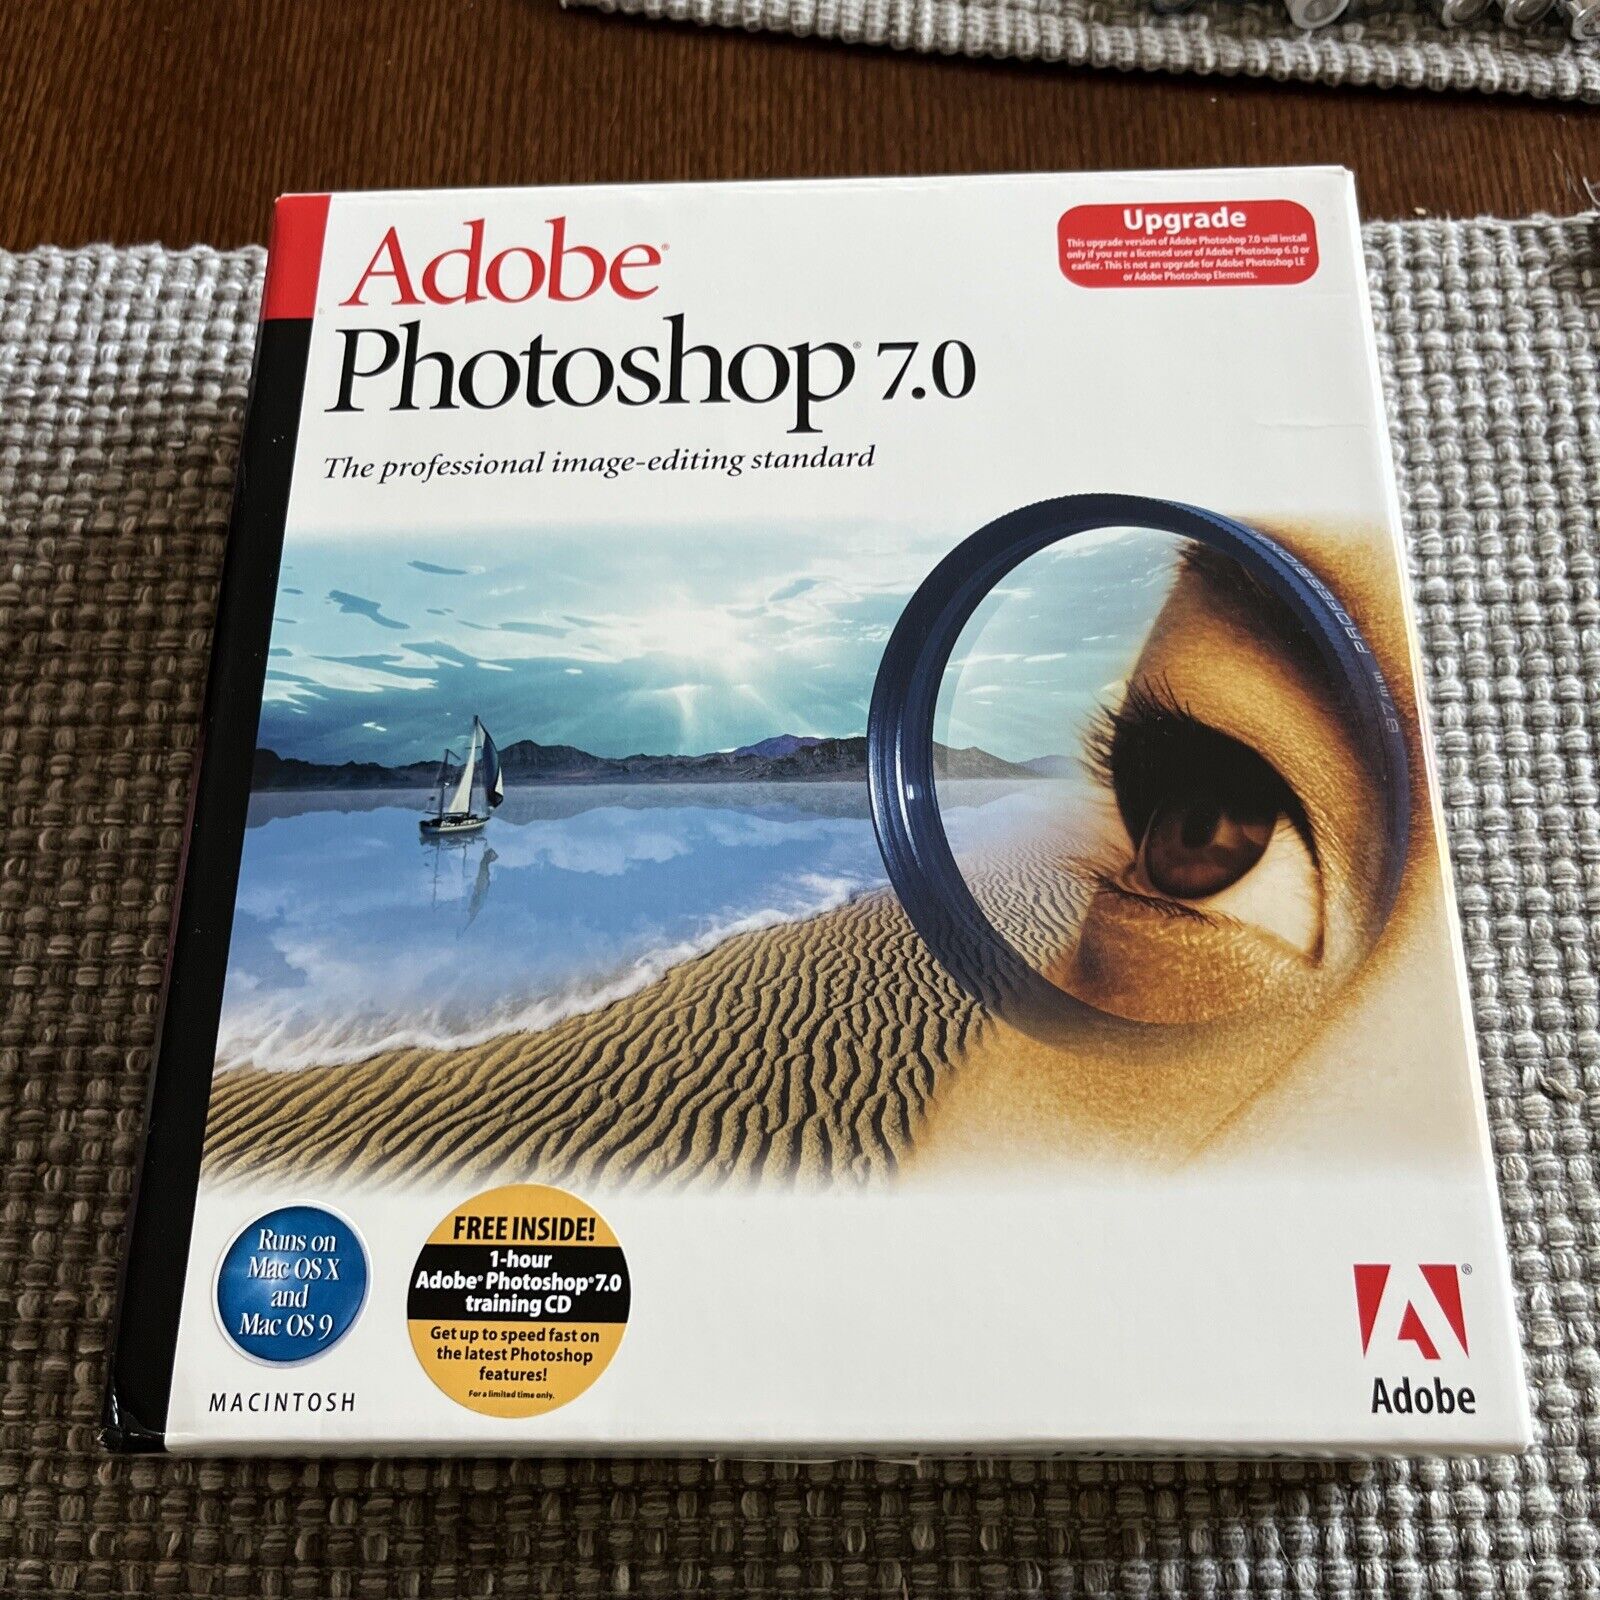 Adobe Photoshop 7 / 7.0 for Apple Mac - Upgrade (13101620) BOXED